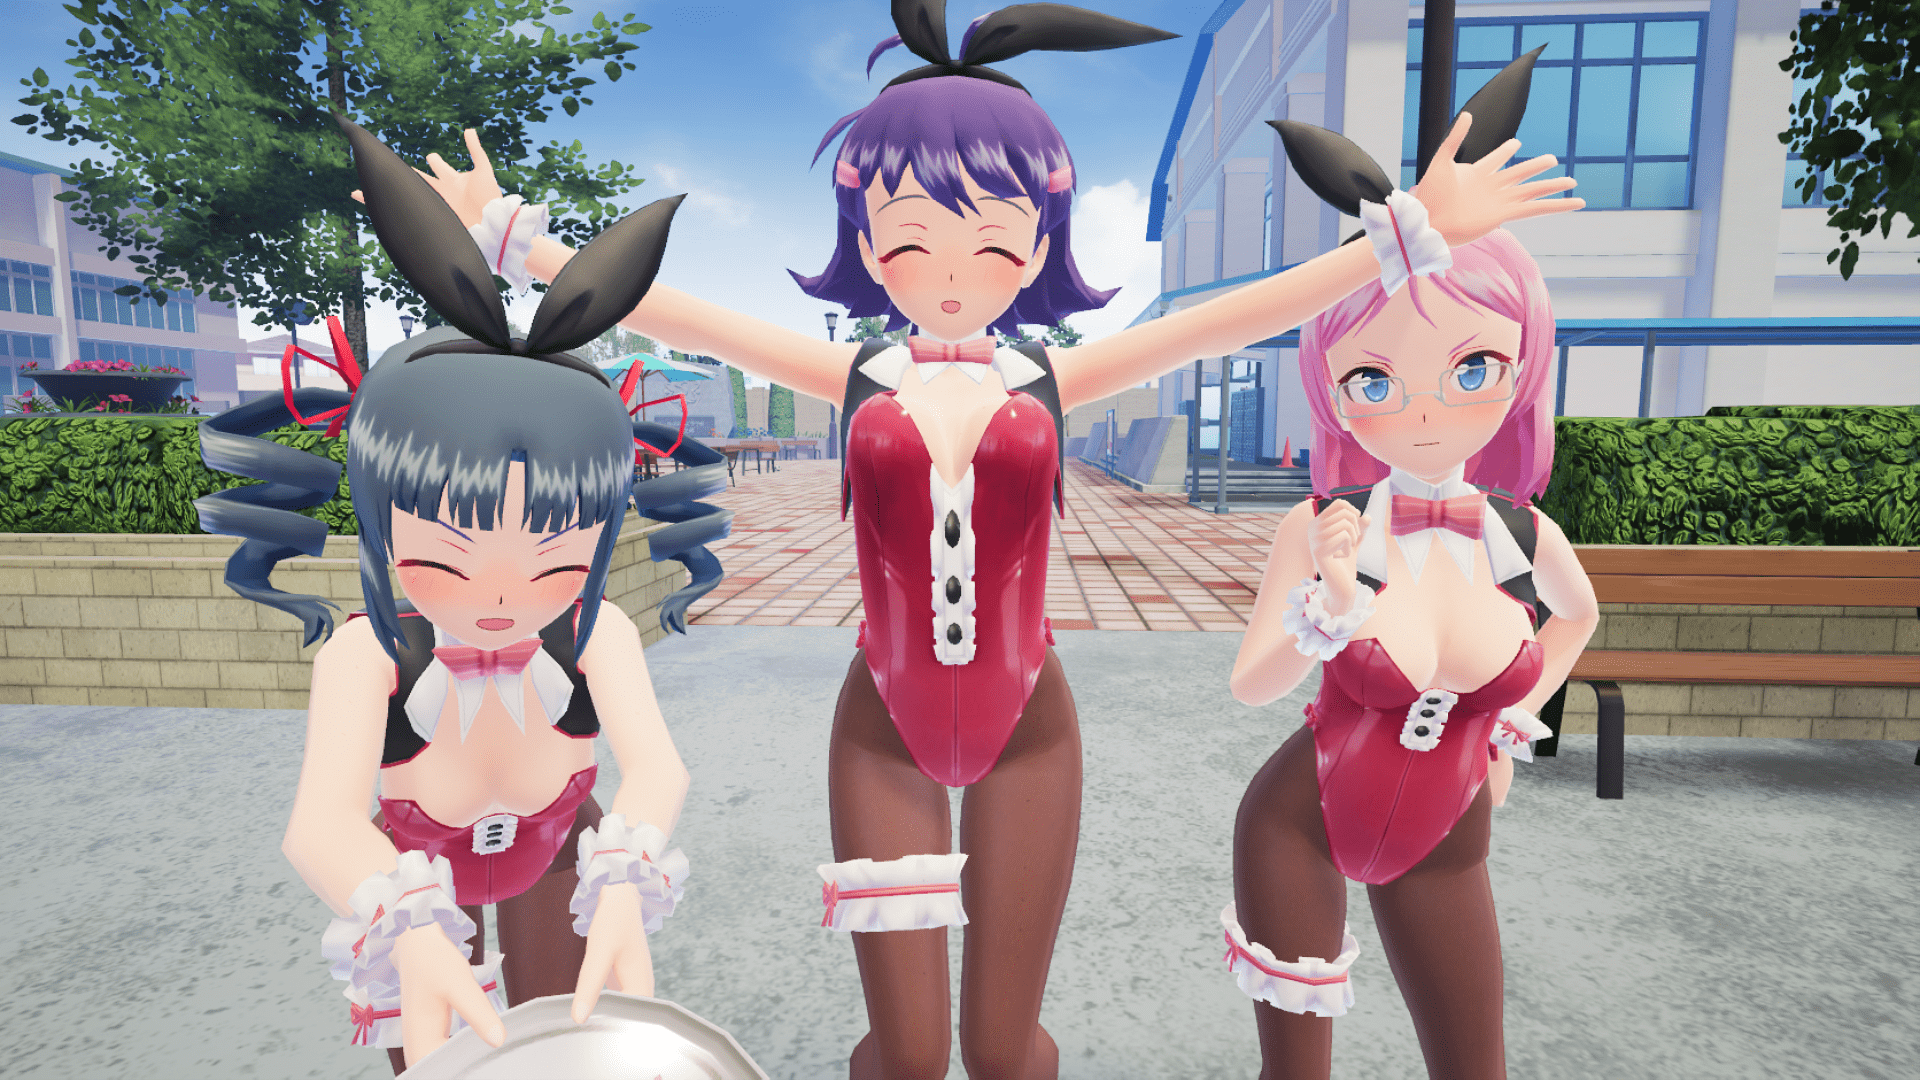 PC players can now get in on the the pantsu-sucking party as Gal*Gun 2 drops on Steam